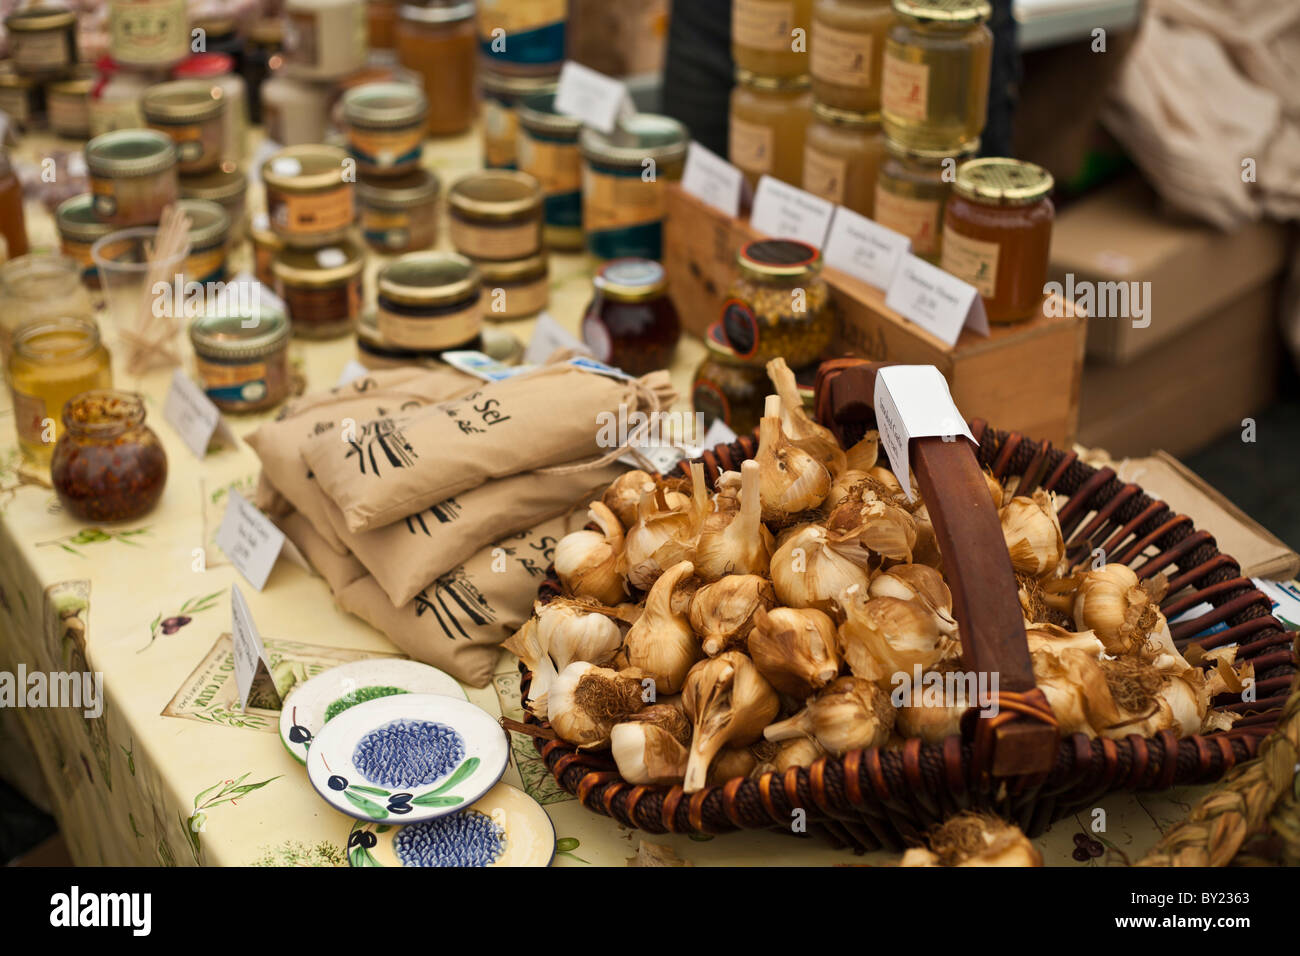 England, Shropshire, Ludlow.  A display of jams and chutneys, and a basket full of garlic, at the Ludlow Food Festival. Stock Photo